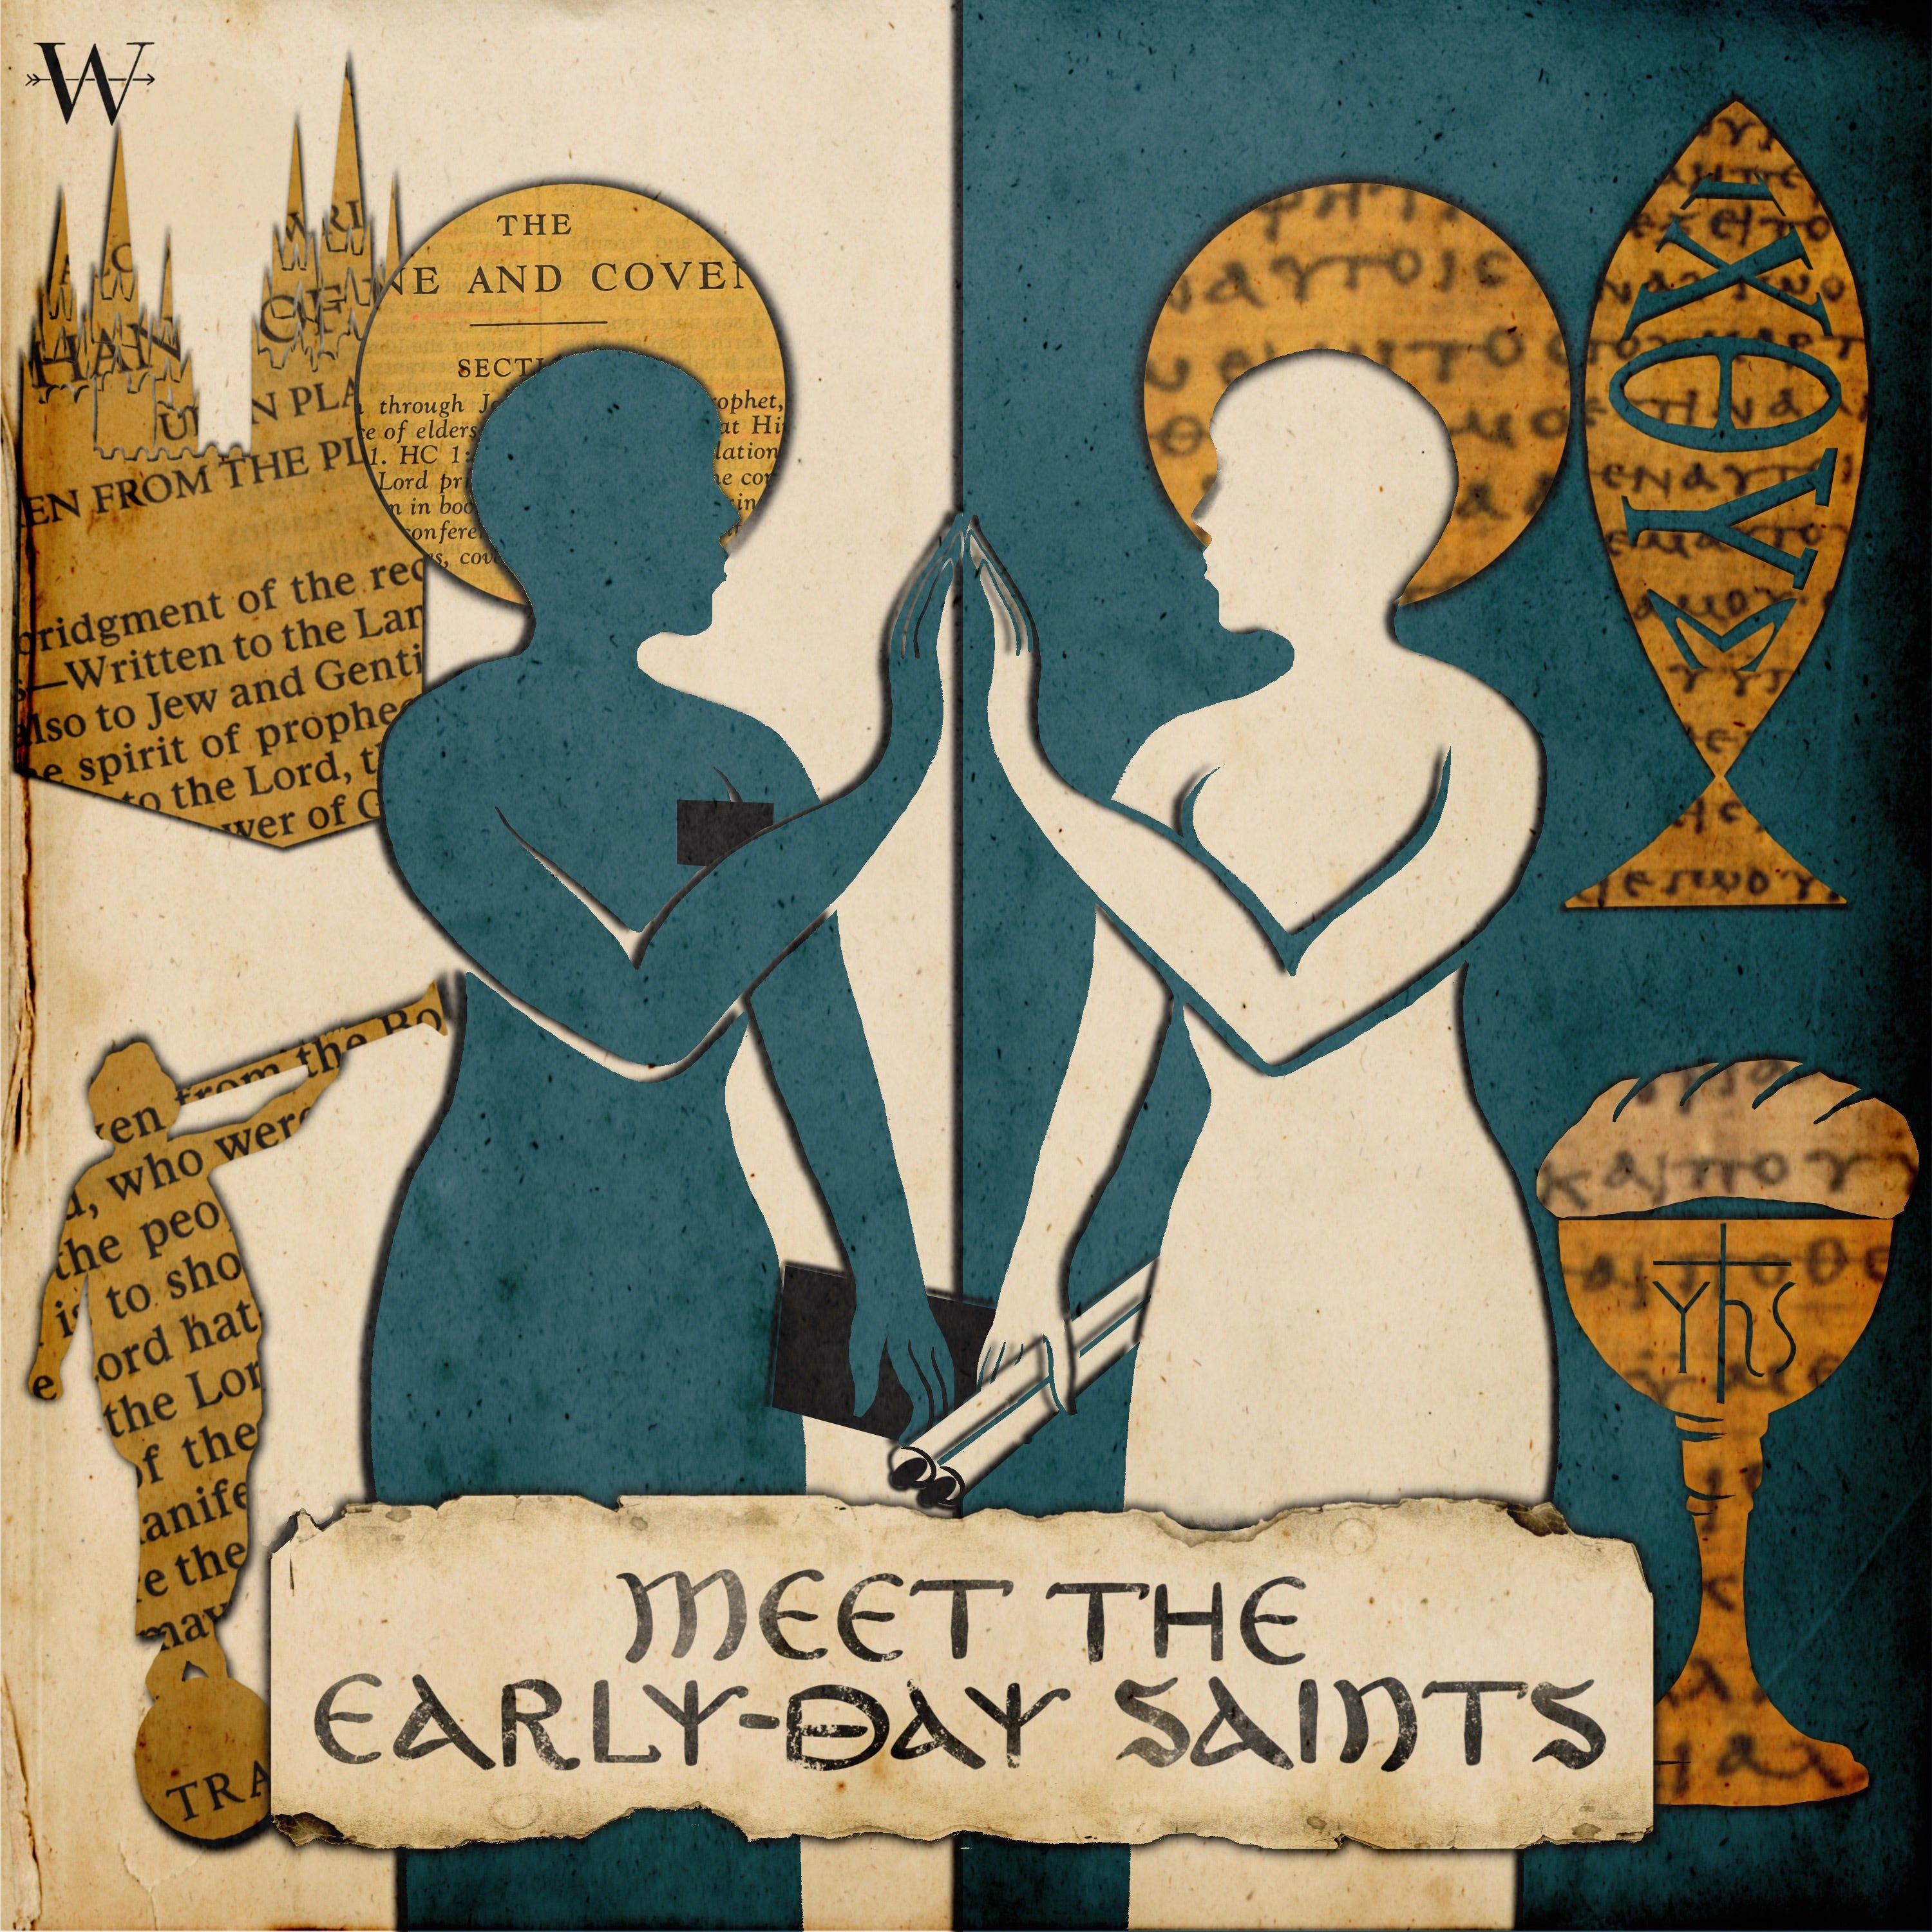 Meet the Early-day Saints Episode 10: Becoming Like God, with Daniel Becerra